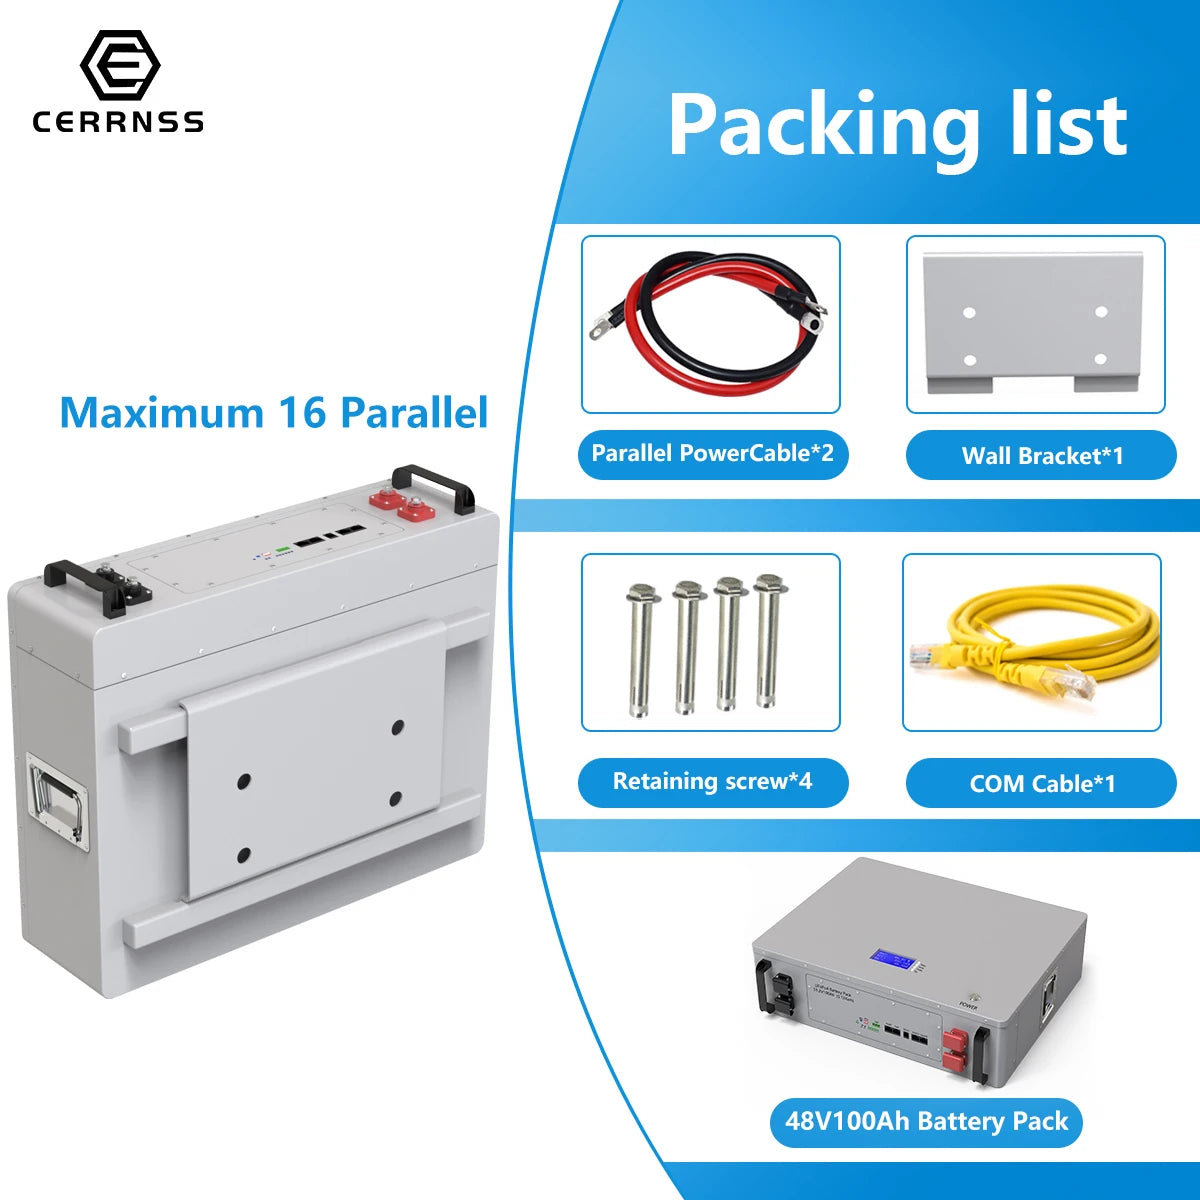 Powerwall LiFePO4 48V 100AH 5KW Battery, Package contents: 100Ah battery, power cables, bracket, screws, and COM cable for solar panel setup.